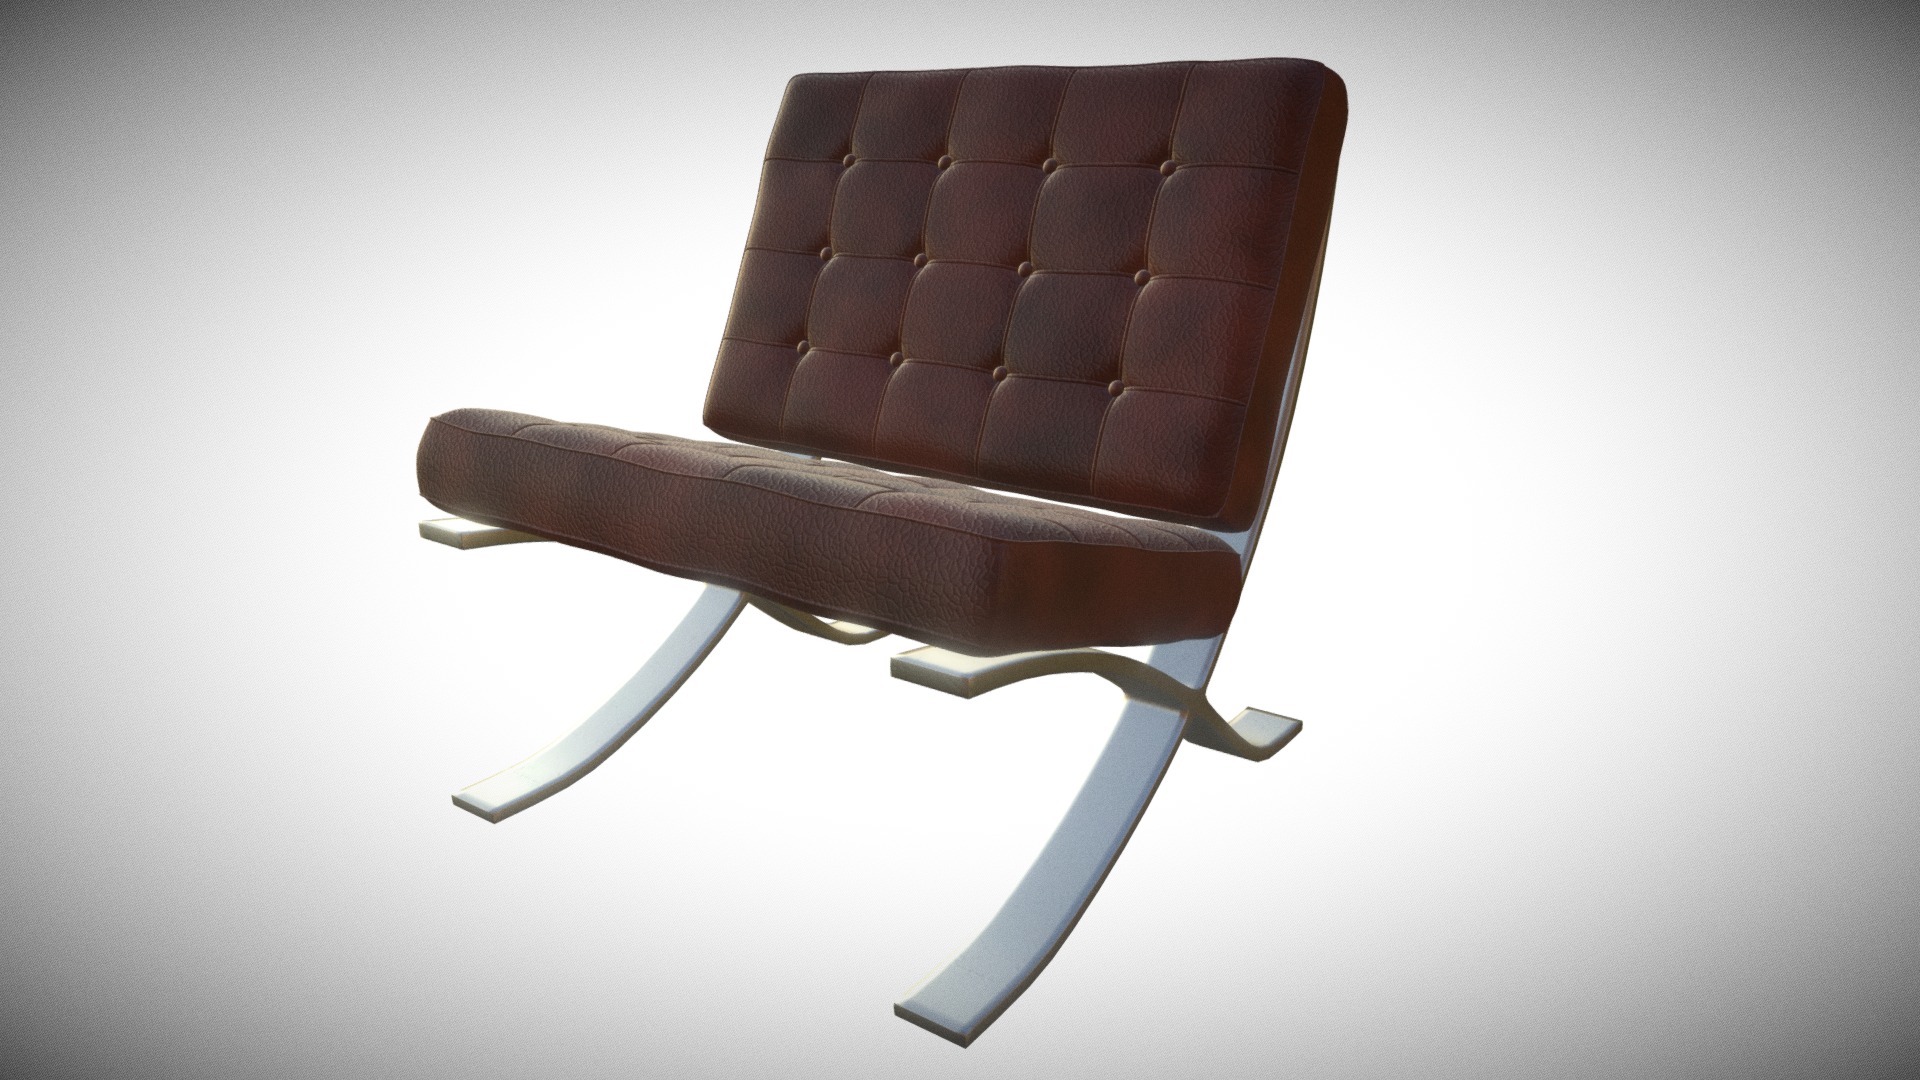 3D model High poly Sofa - This is a 3D model of the High poly Sofa. The 3D model is about a chair with a cushion.